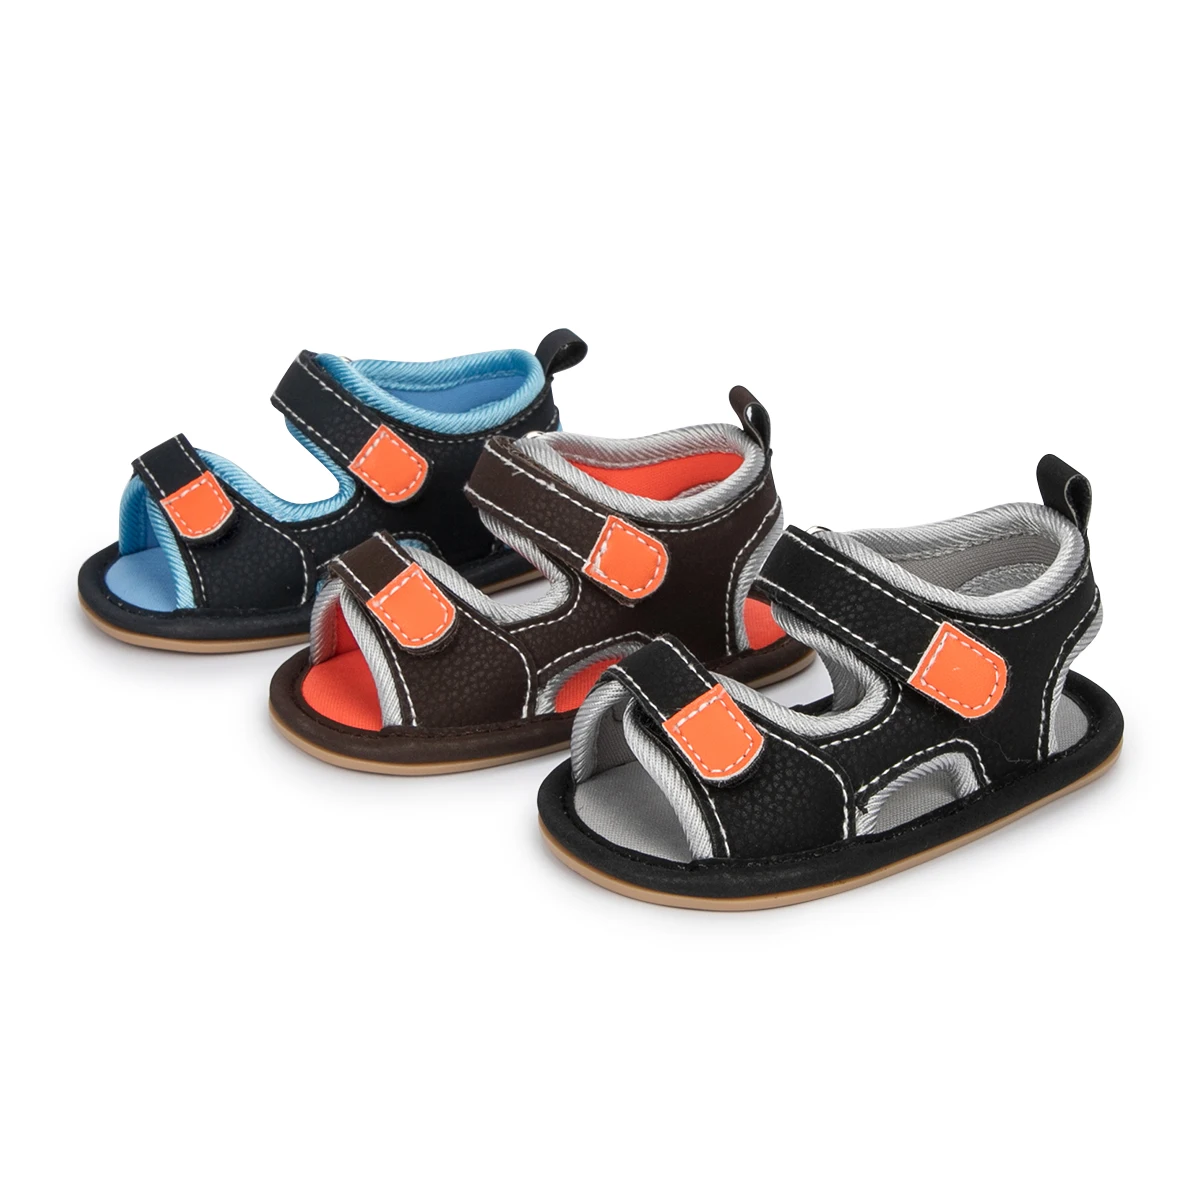 

Hot selling summer rubber soft sole Casual commfortable 0 18 months infant baby boysummer baby sandals, Blue,grey,orange